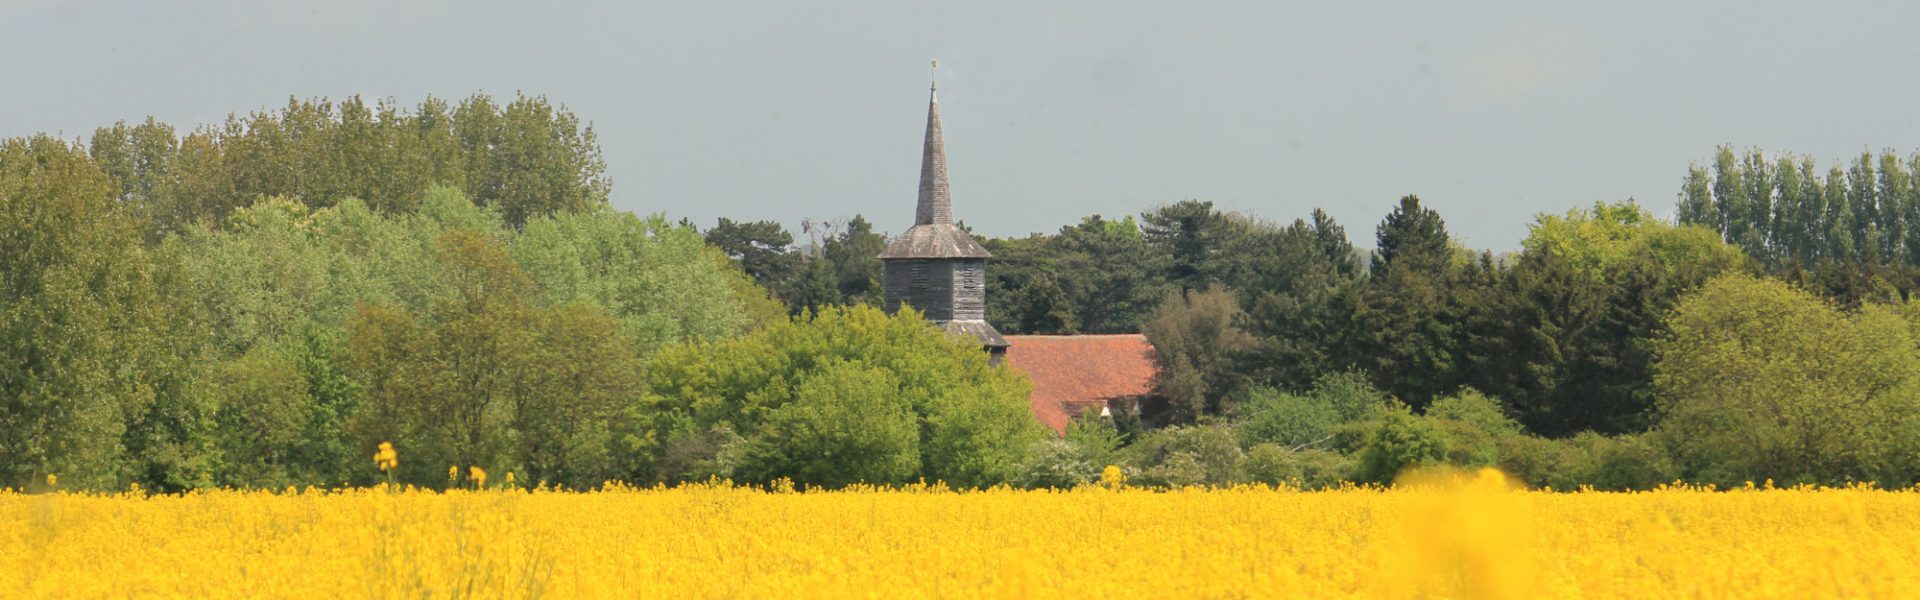 A summer view across open farm land towards the bell tower of St Laurence church.